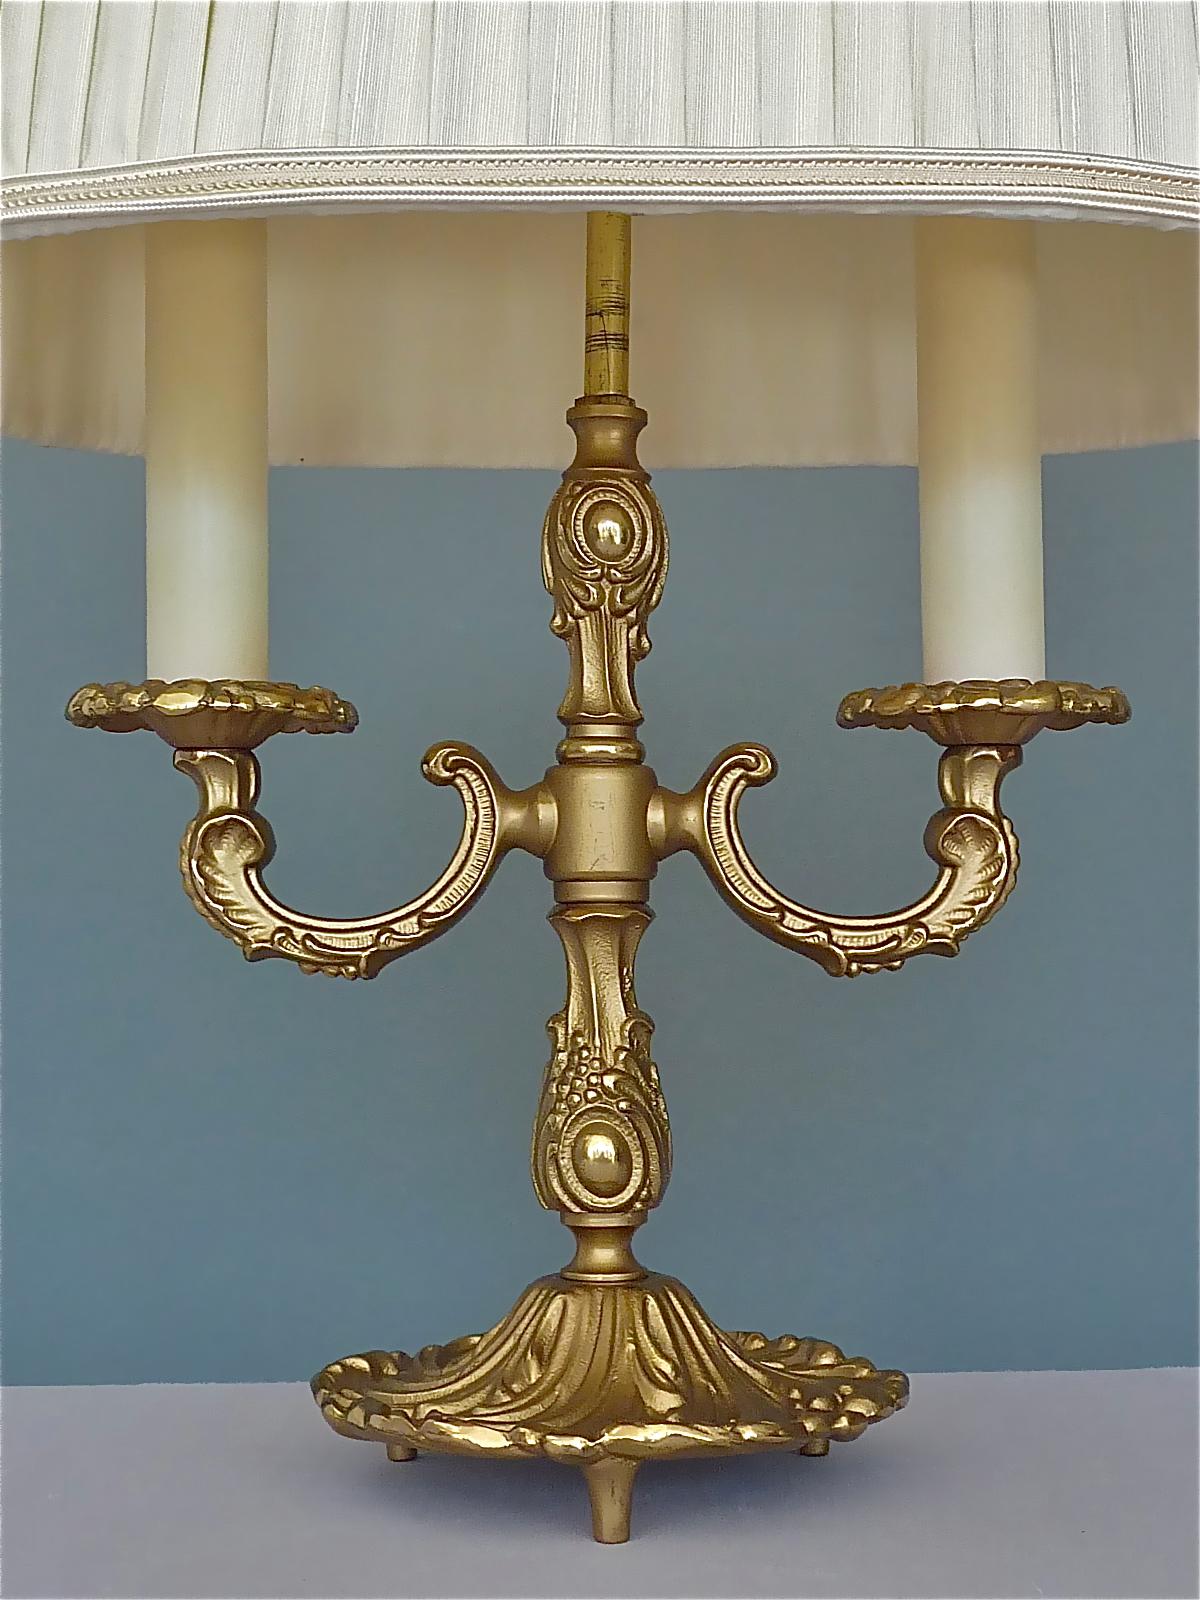 Baroque Maison Jansen Style Midcentury Table Lamp Brass Leaf Decor Germany 1950s For Sale 7